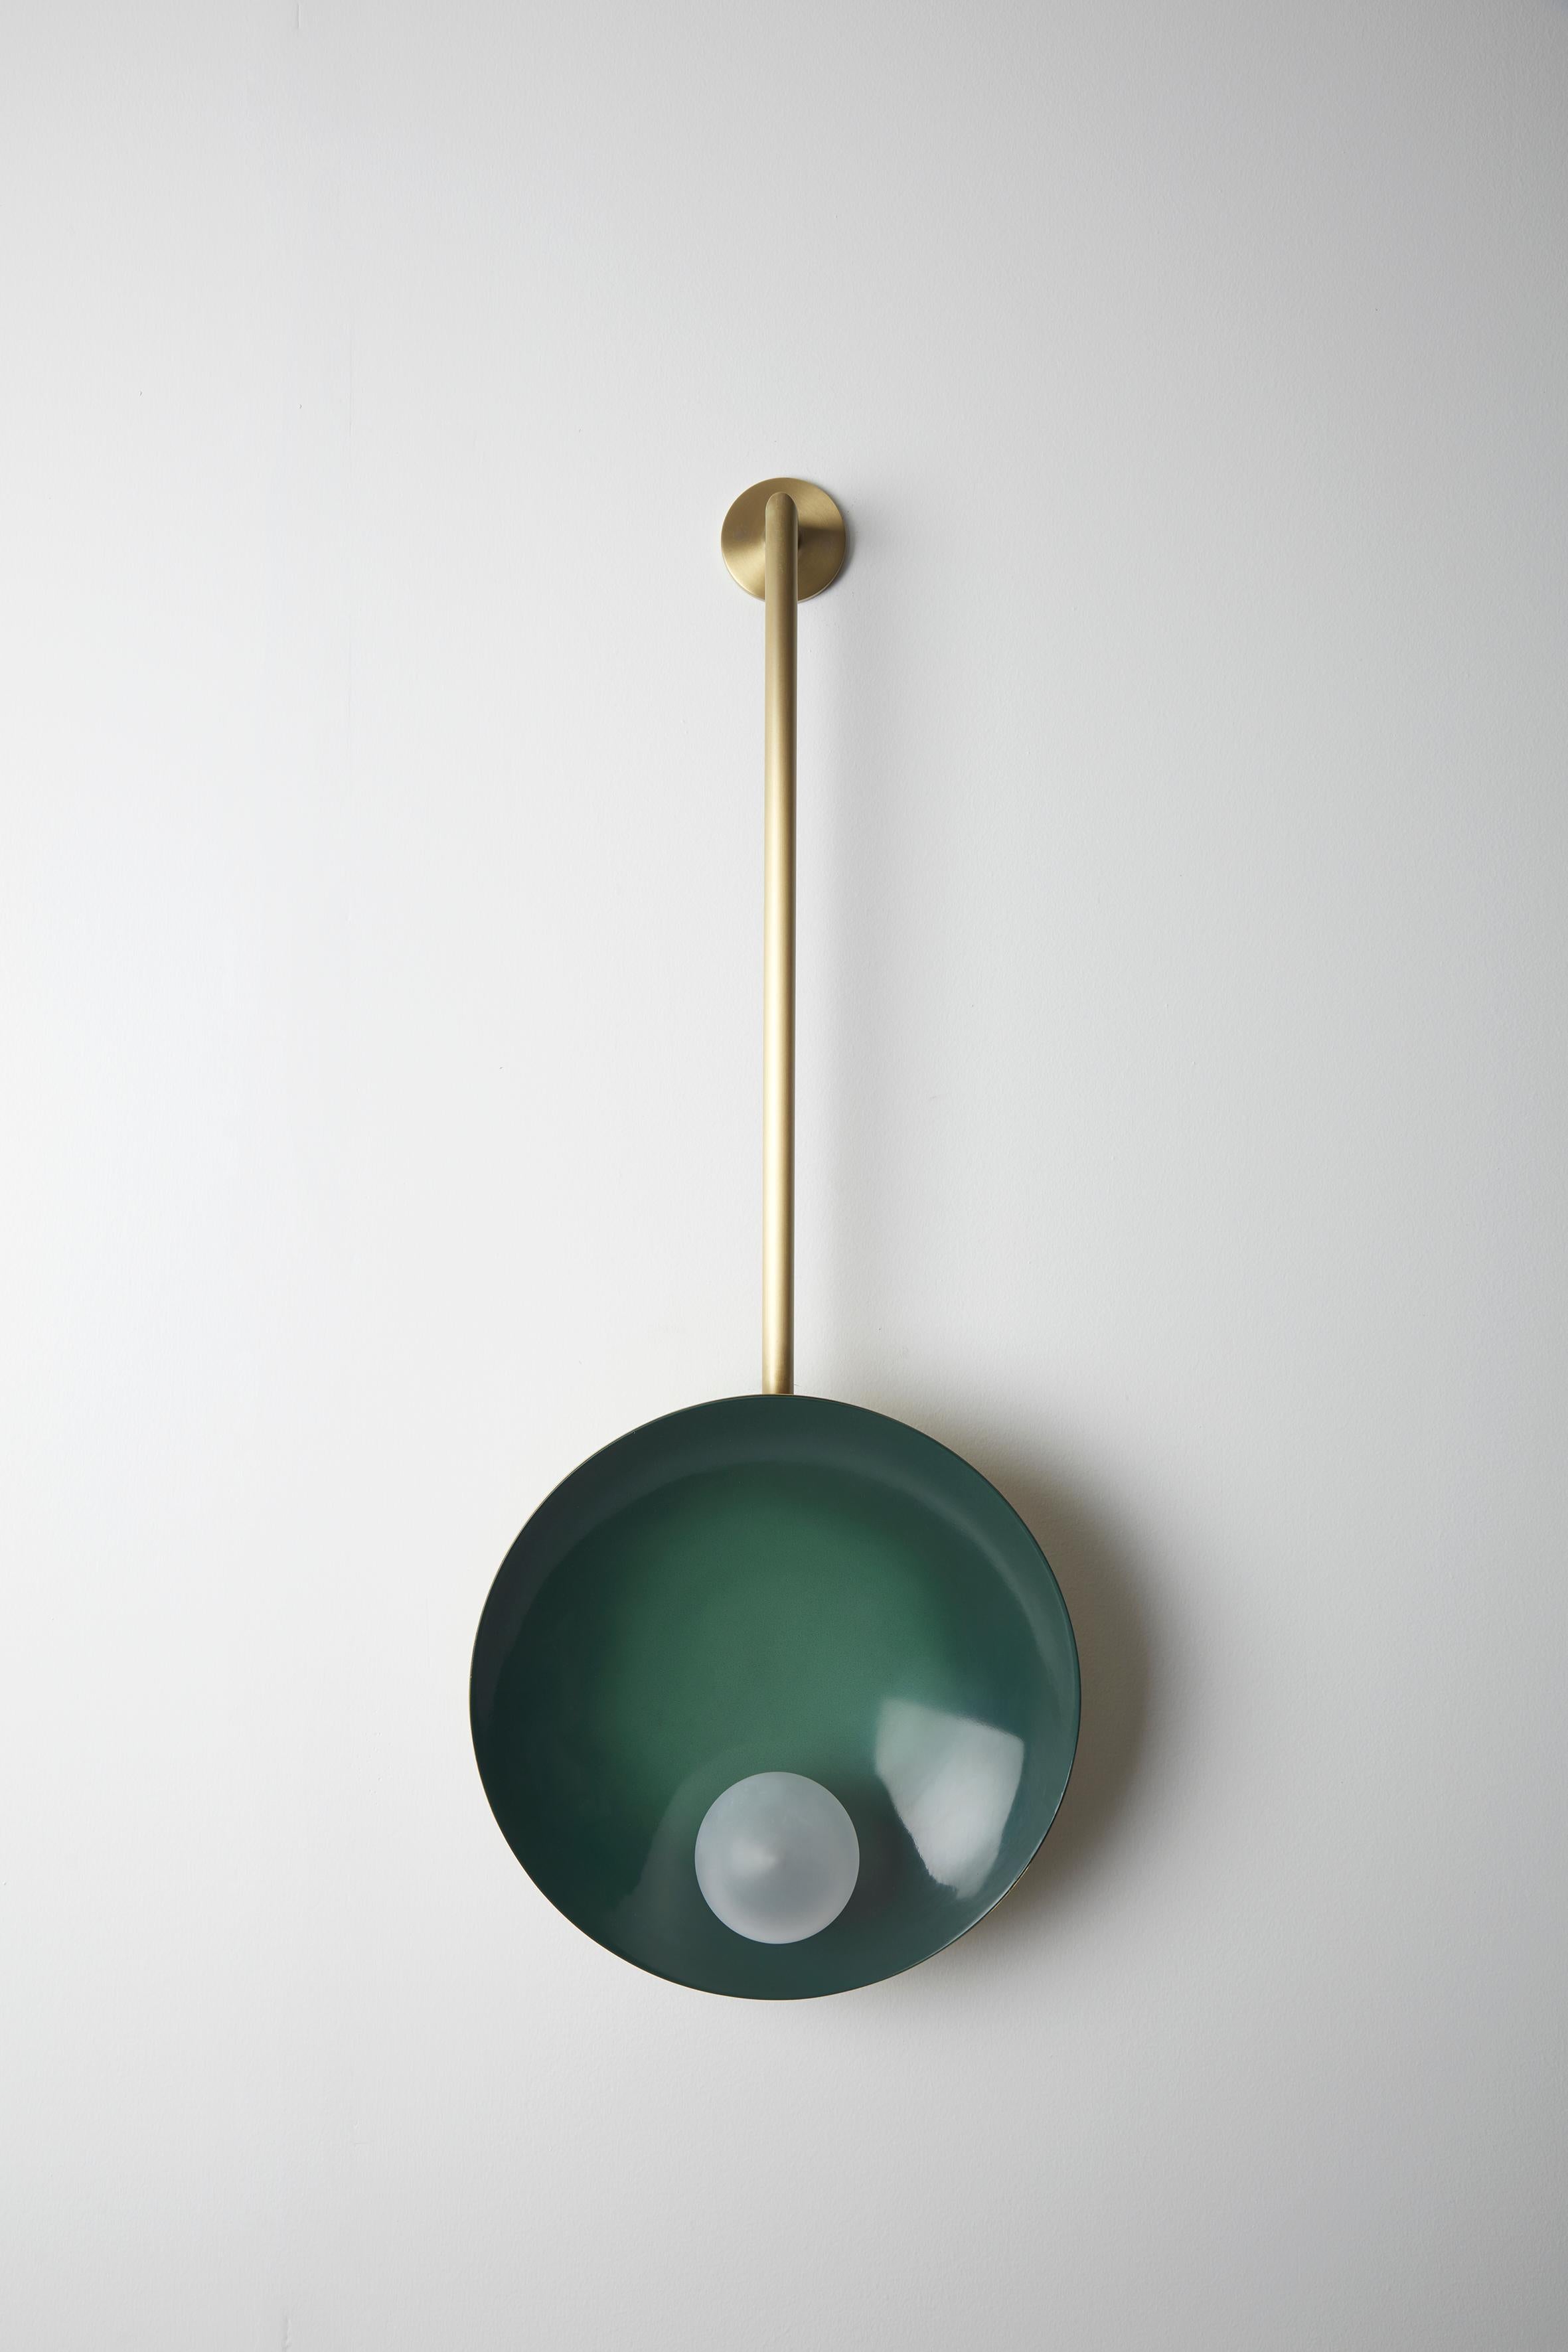 Oyster wall-mounted emerald green, Carla Baz
Dimensions: ø 30 x H 78 x D 14 cm
Weight: 2 kg
Material: Brass, blown satin glass globes

Oyster is a series of sculptural lighting pieces that were developed in 2016. Wanting to explore the idea of